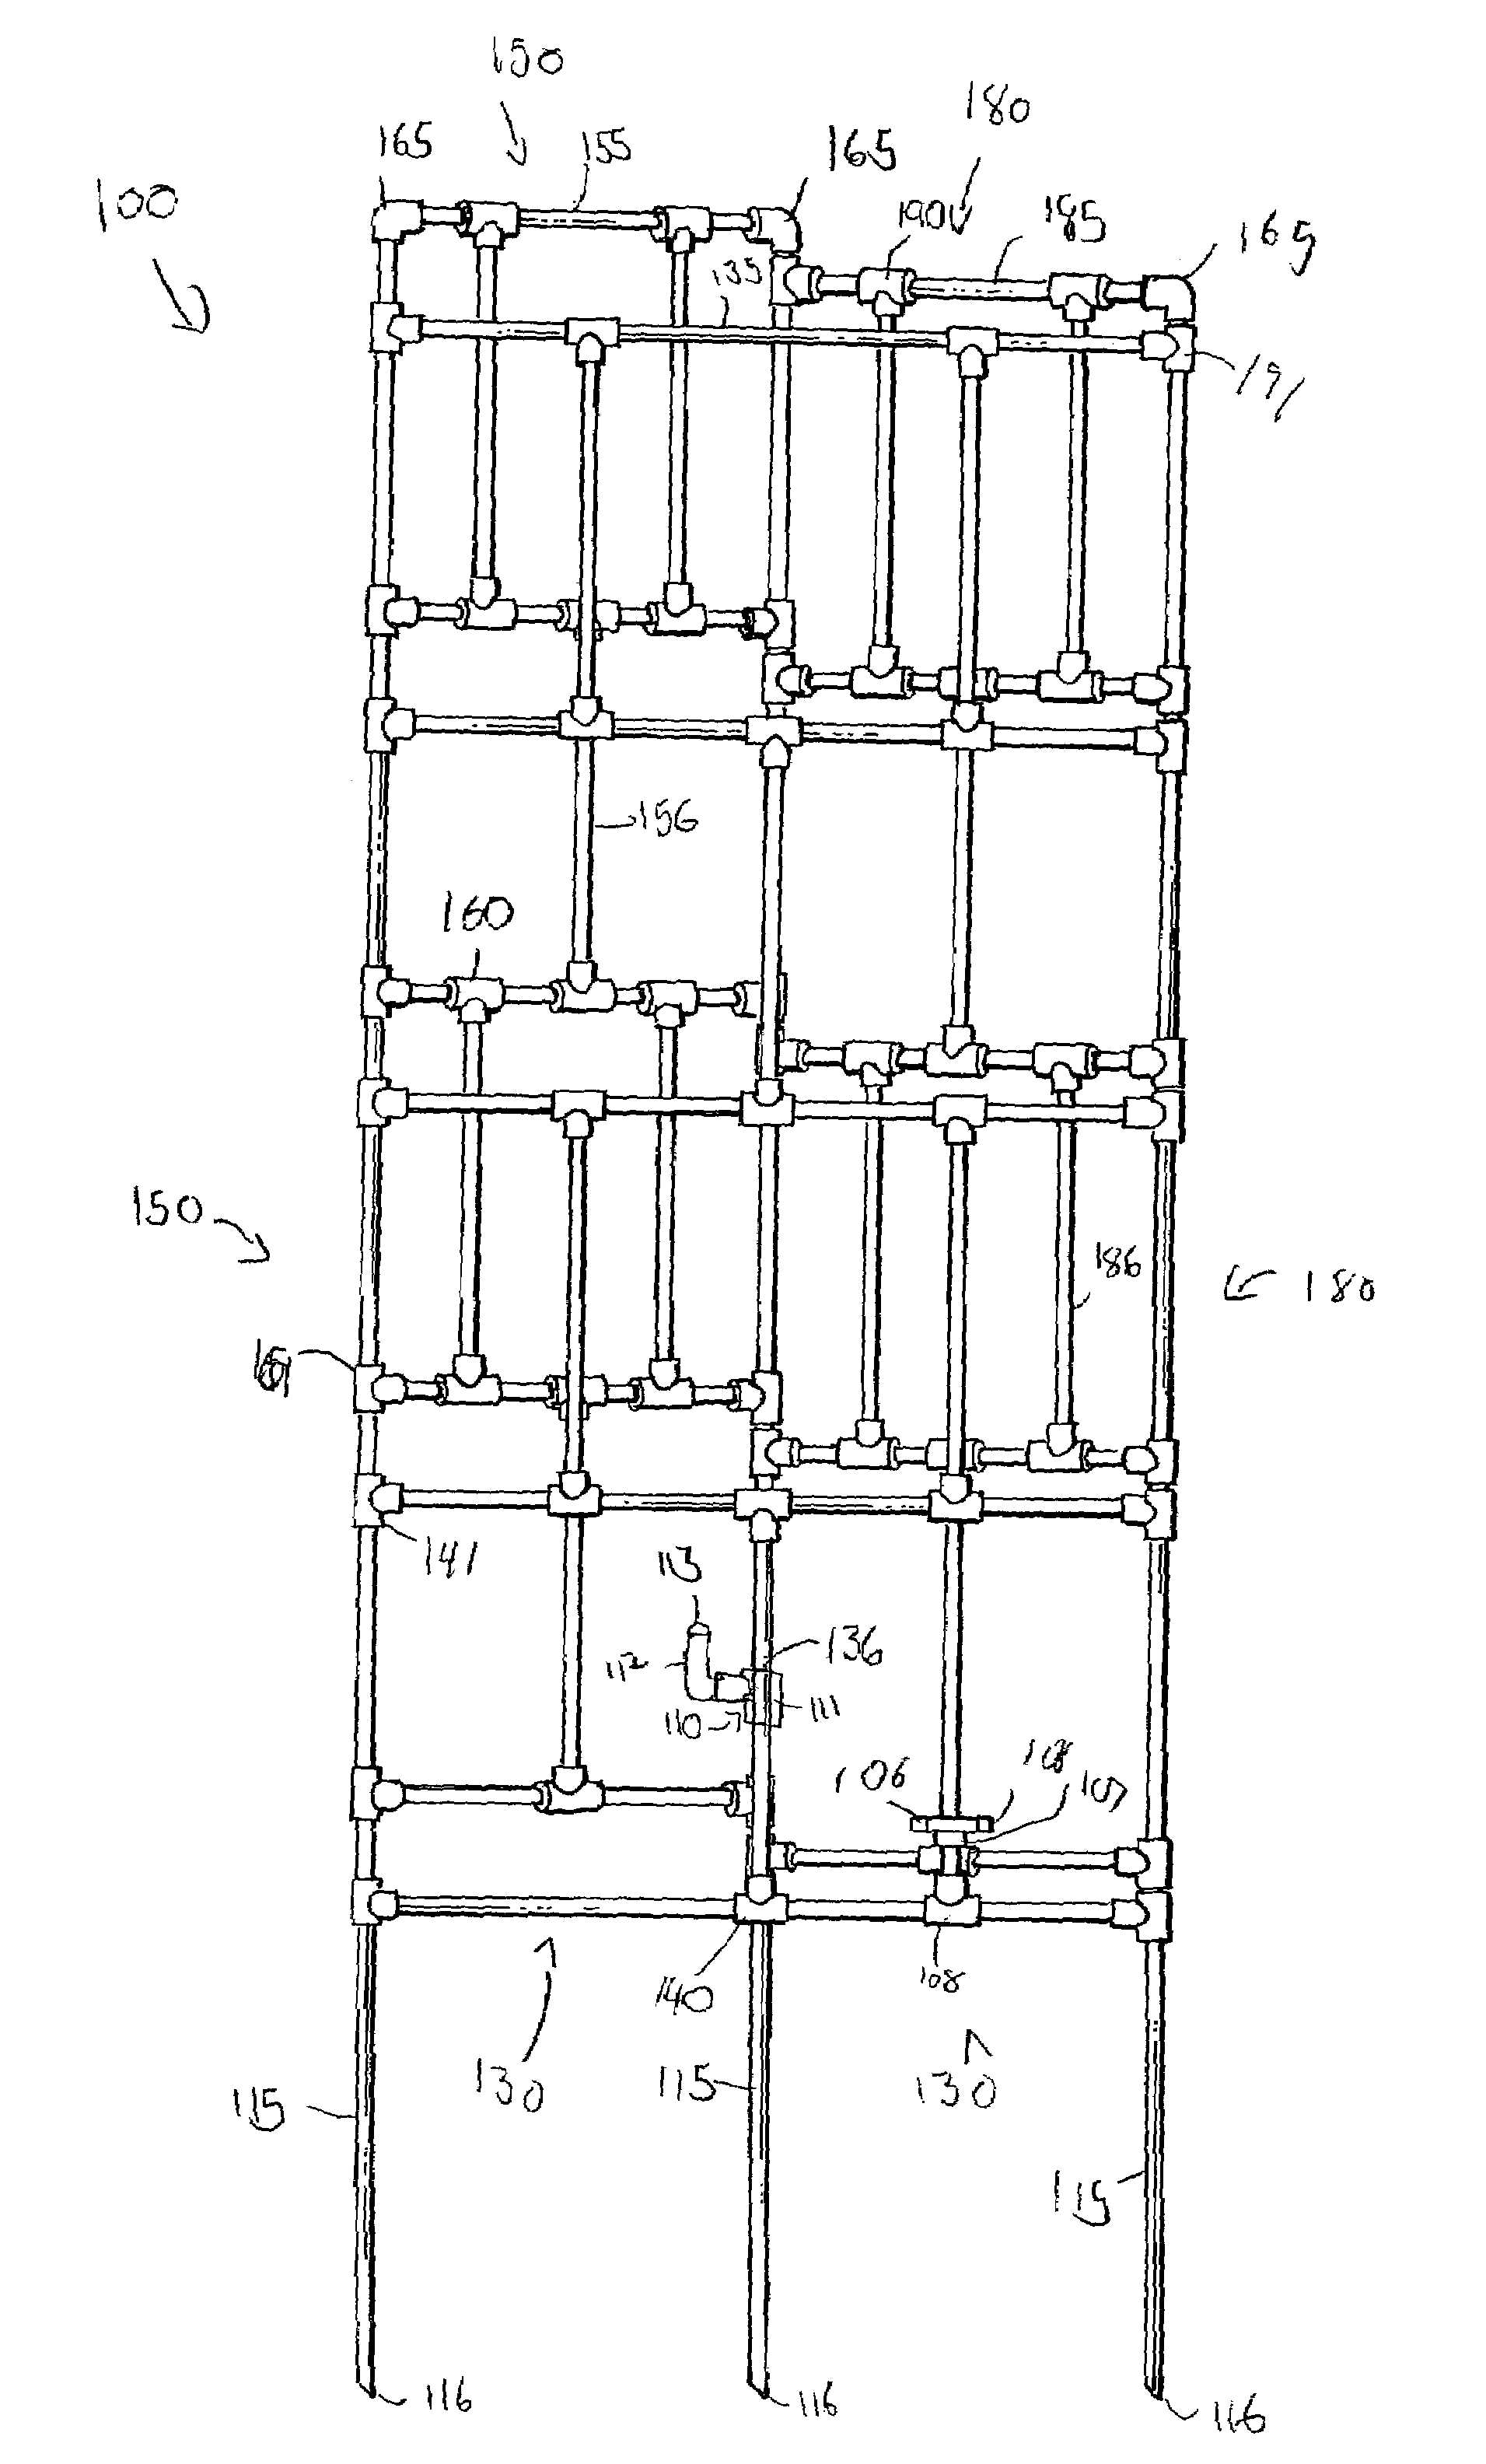 Gardening cage apparatus and system